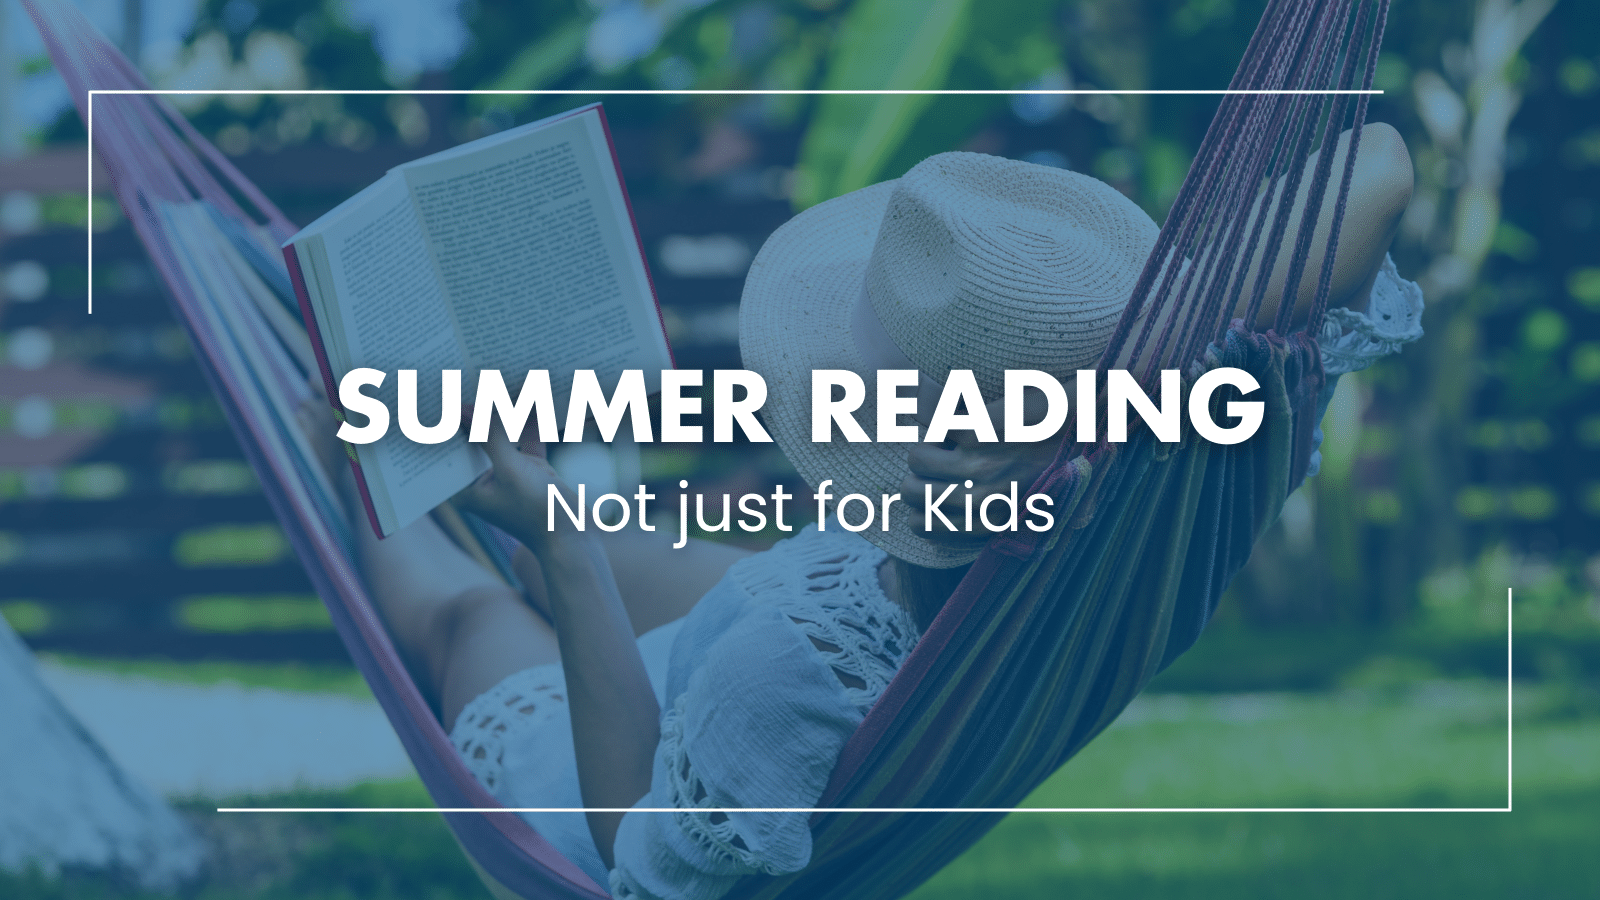 Summer Reading is Not Just for Kids